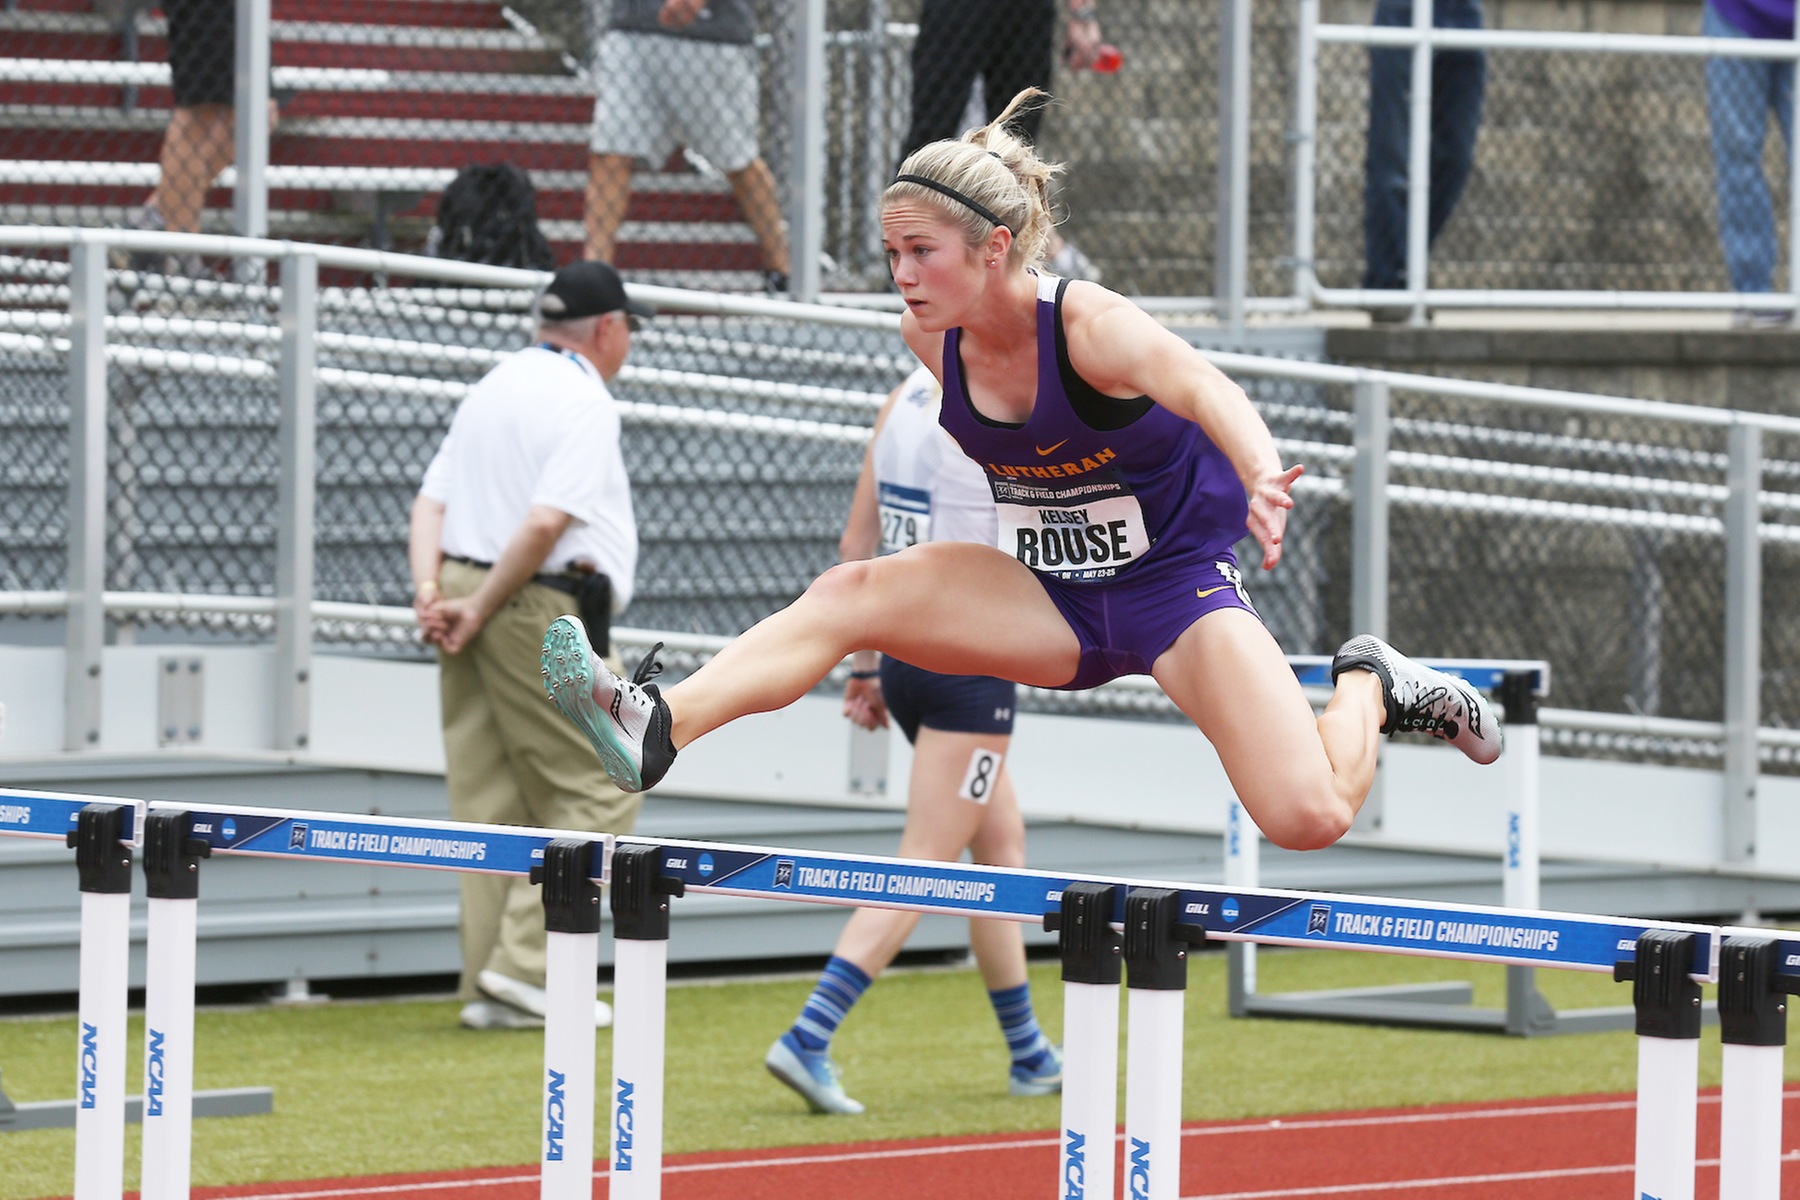 Rouse Finishes 21st in Heptathlon at NCAA Championships